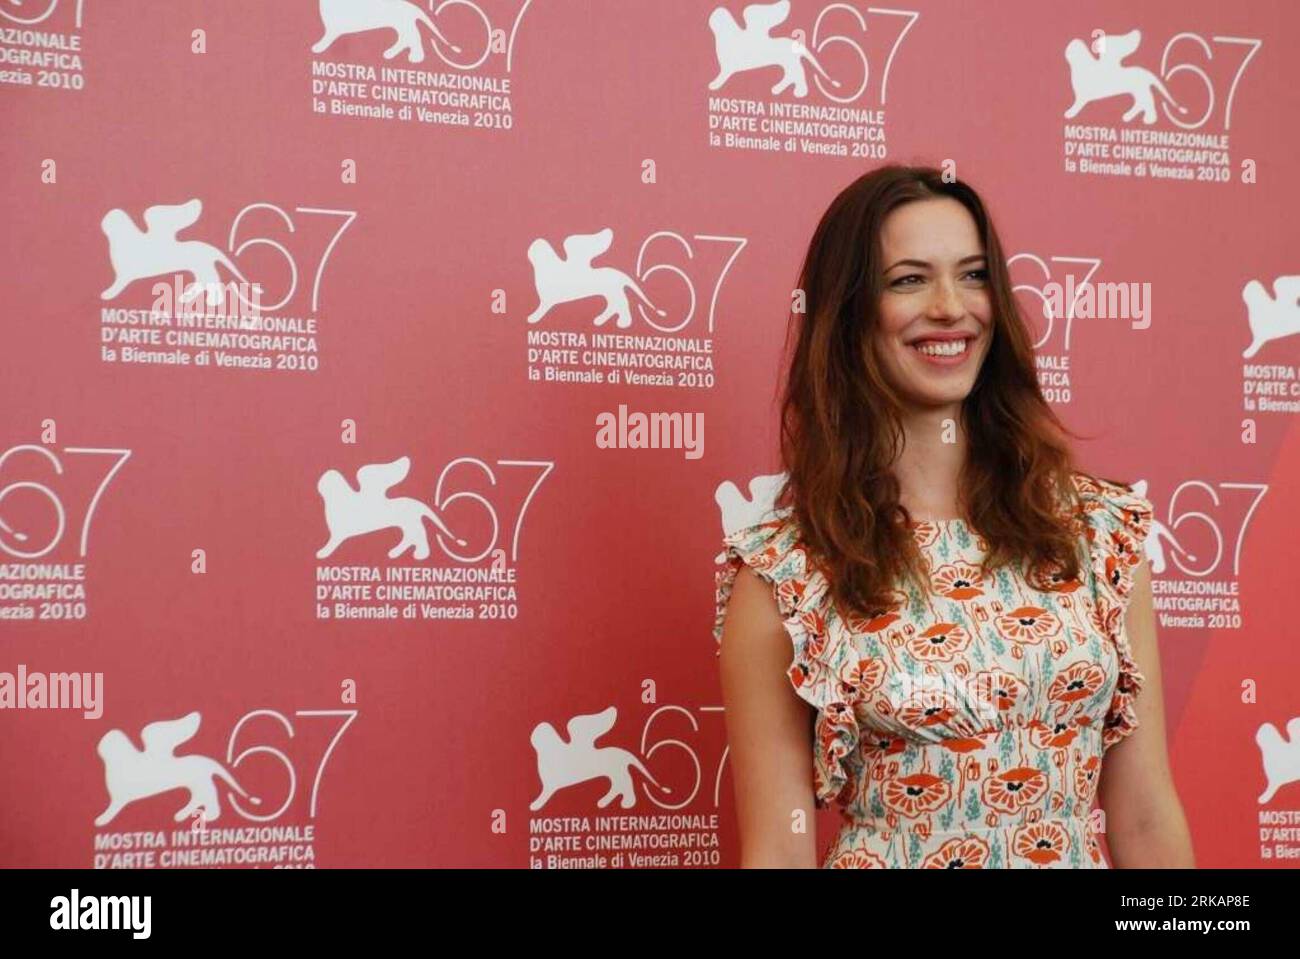 Bildnummer: 54411854  Datum: 08.09.2010  Copyright: imago/Xinhua VENICE, Sept. 8, 2010 (Xinhua) -- American actress Rebecca Hall attends the photocall of The Town during the 67th Venice Film Festival in Venice, north Italy, Sept. 8, 2010. (Xinhua/Silvia Cesari) (zcq) ITALY-VENICE-FILM-THE TOWN PUBLICATIONxNOTxINxCHN Kultur Entertainment People Film 67. Internationale Filmfestspiele Venedig Filmpremiere kbdig xsp 2010 quer Highlight premiumd xint o0 Stadt ohne Gnade    Bildnummer 54411854 Date 08 09 2010 Copyright Imago XINHUA Venice Sept 8 2010 XINHUA American actress Rebecca Hall Attends The Stock Photo